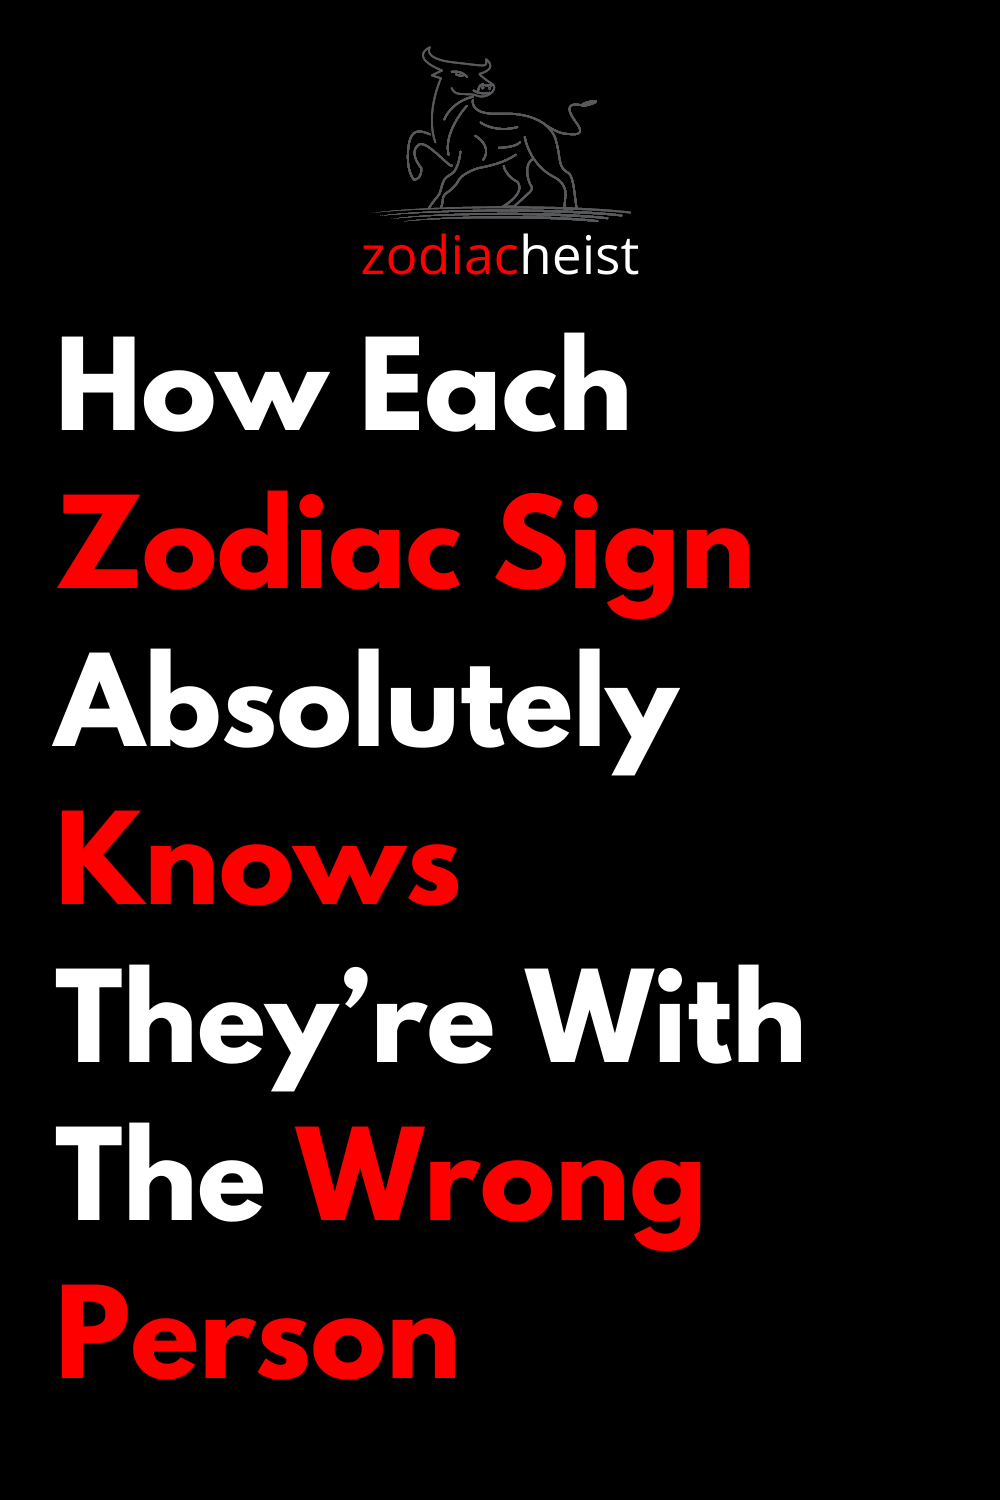 How Each Zodiac Sign Absolutely Knows They’re With The Wrong Person